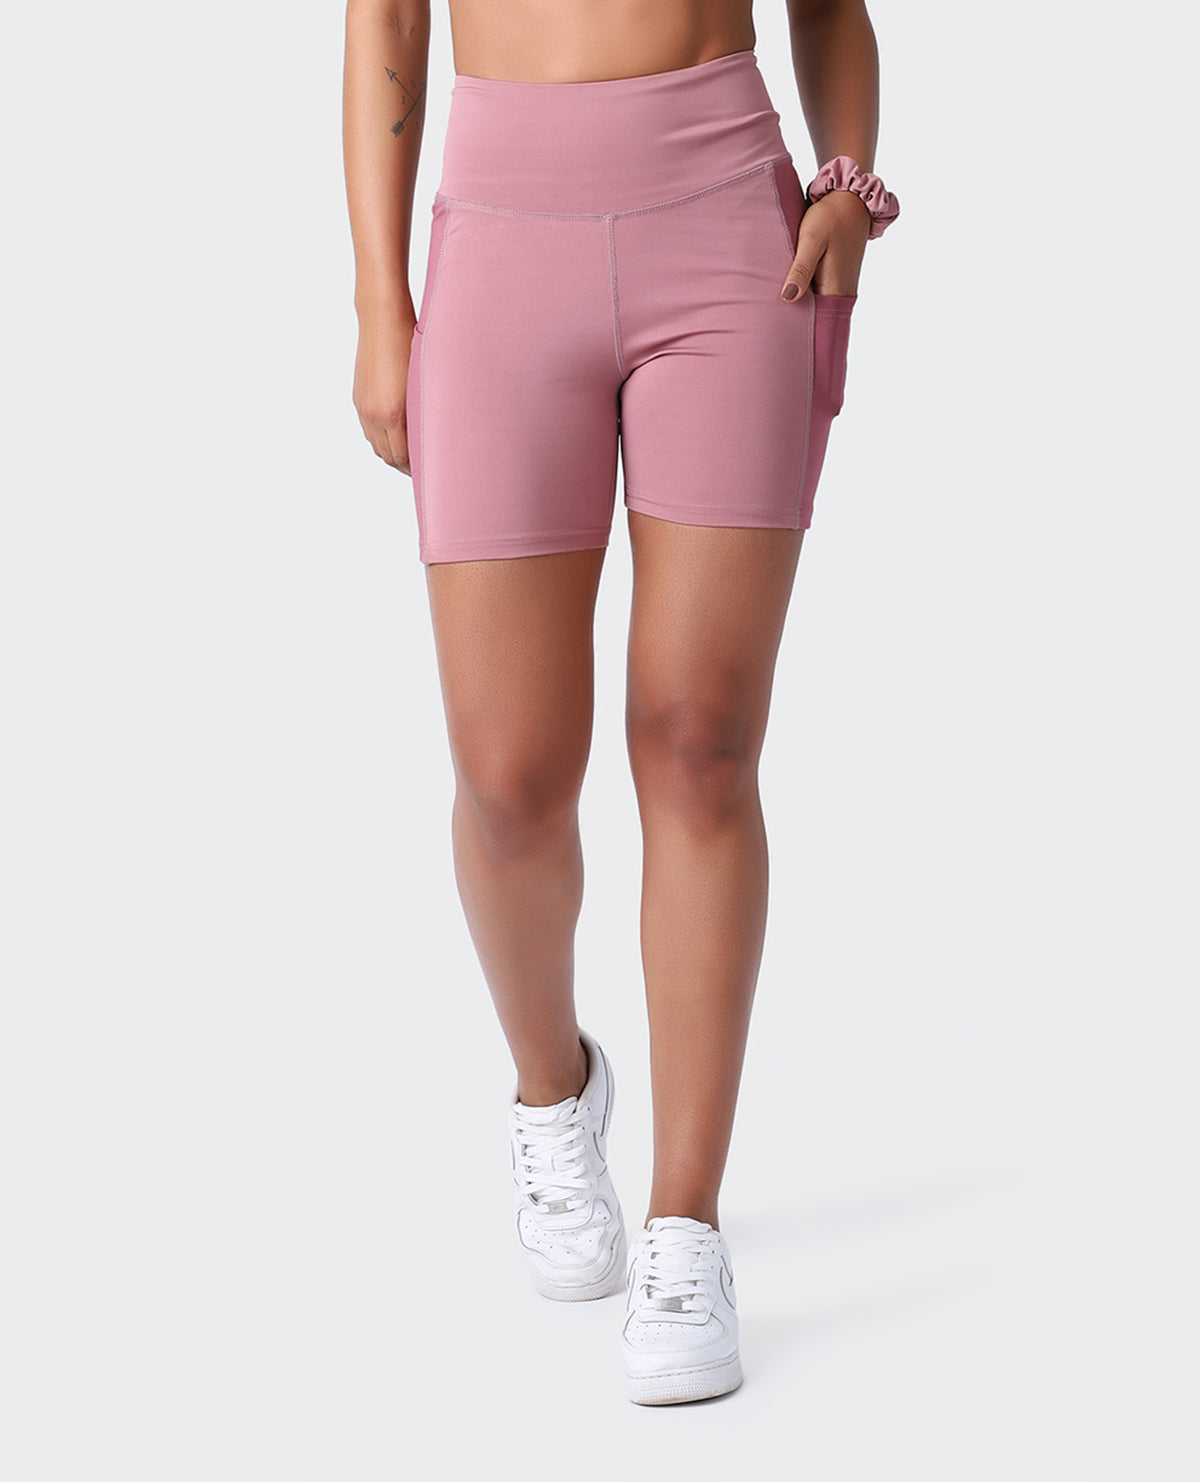 Women Sports Gym Shorts with Pockets – Kica Active